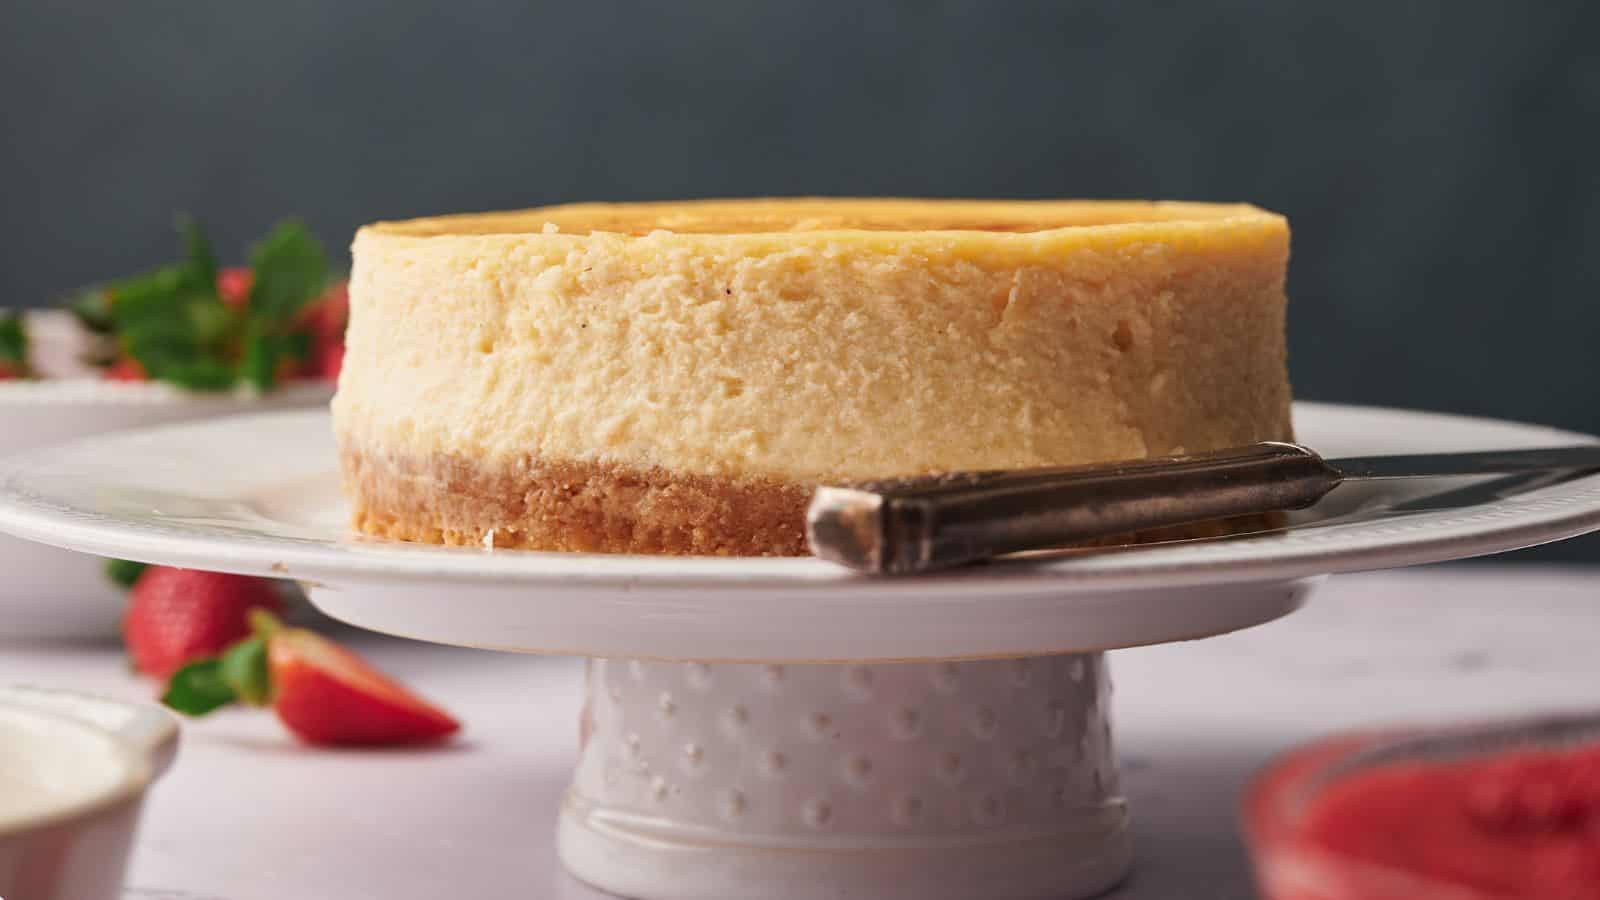 <p>Even desserts are attainable with an air fryer. Air Fryer Cheesecake provides a straightforward way to enjoy a classic dessert without the complexities of traditional baking methods.<br><strong>Get the Recipe: </strong><a href="https://www.splashoftaste.com/air-fryer-cheesecake/?utm_source=msn&utm_medium=page&utm_campaign=msn">Air Fryer Cheesecake</a></p>